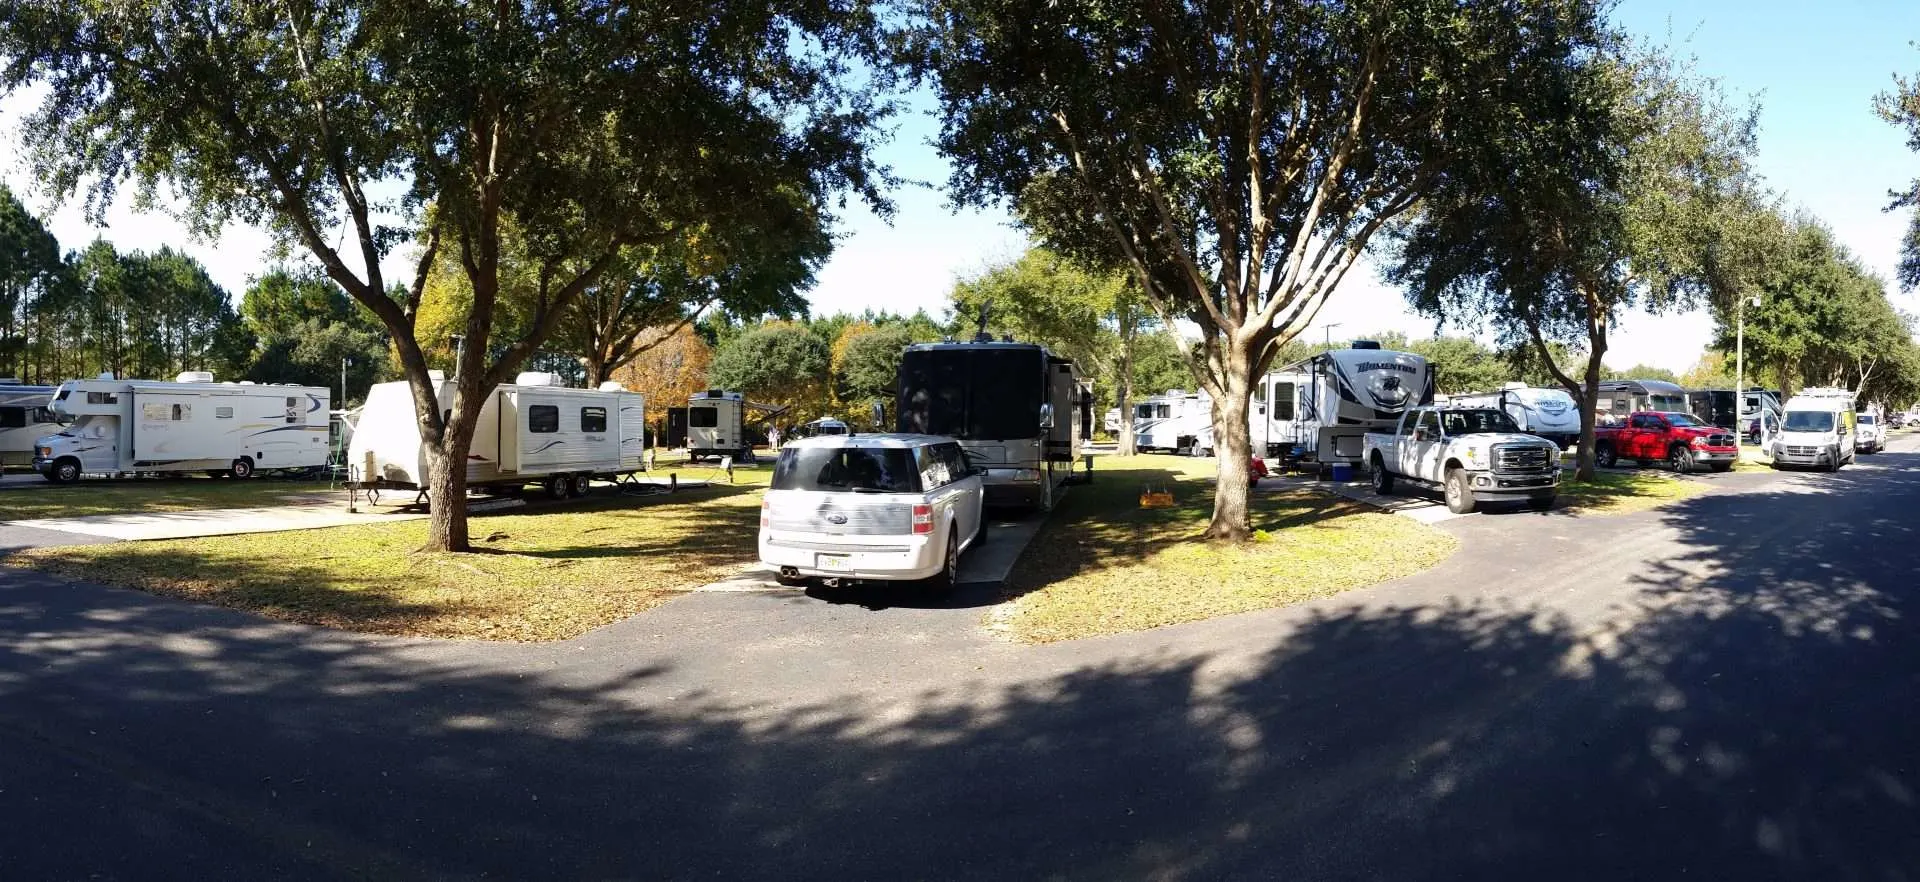 RVs parked at Good Sam campground